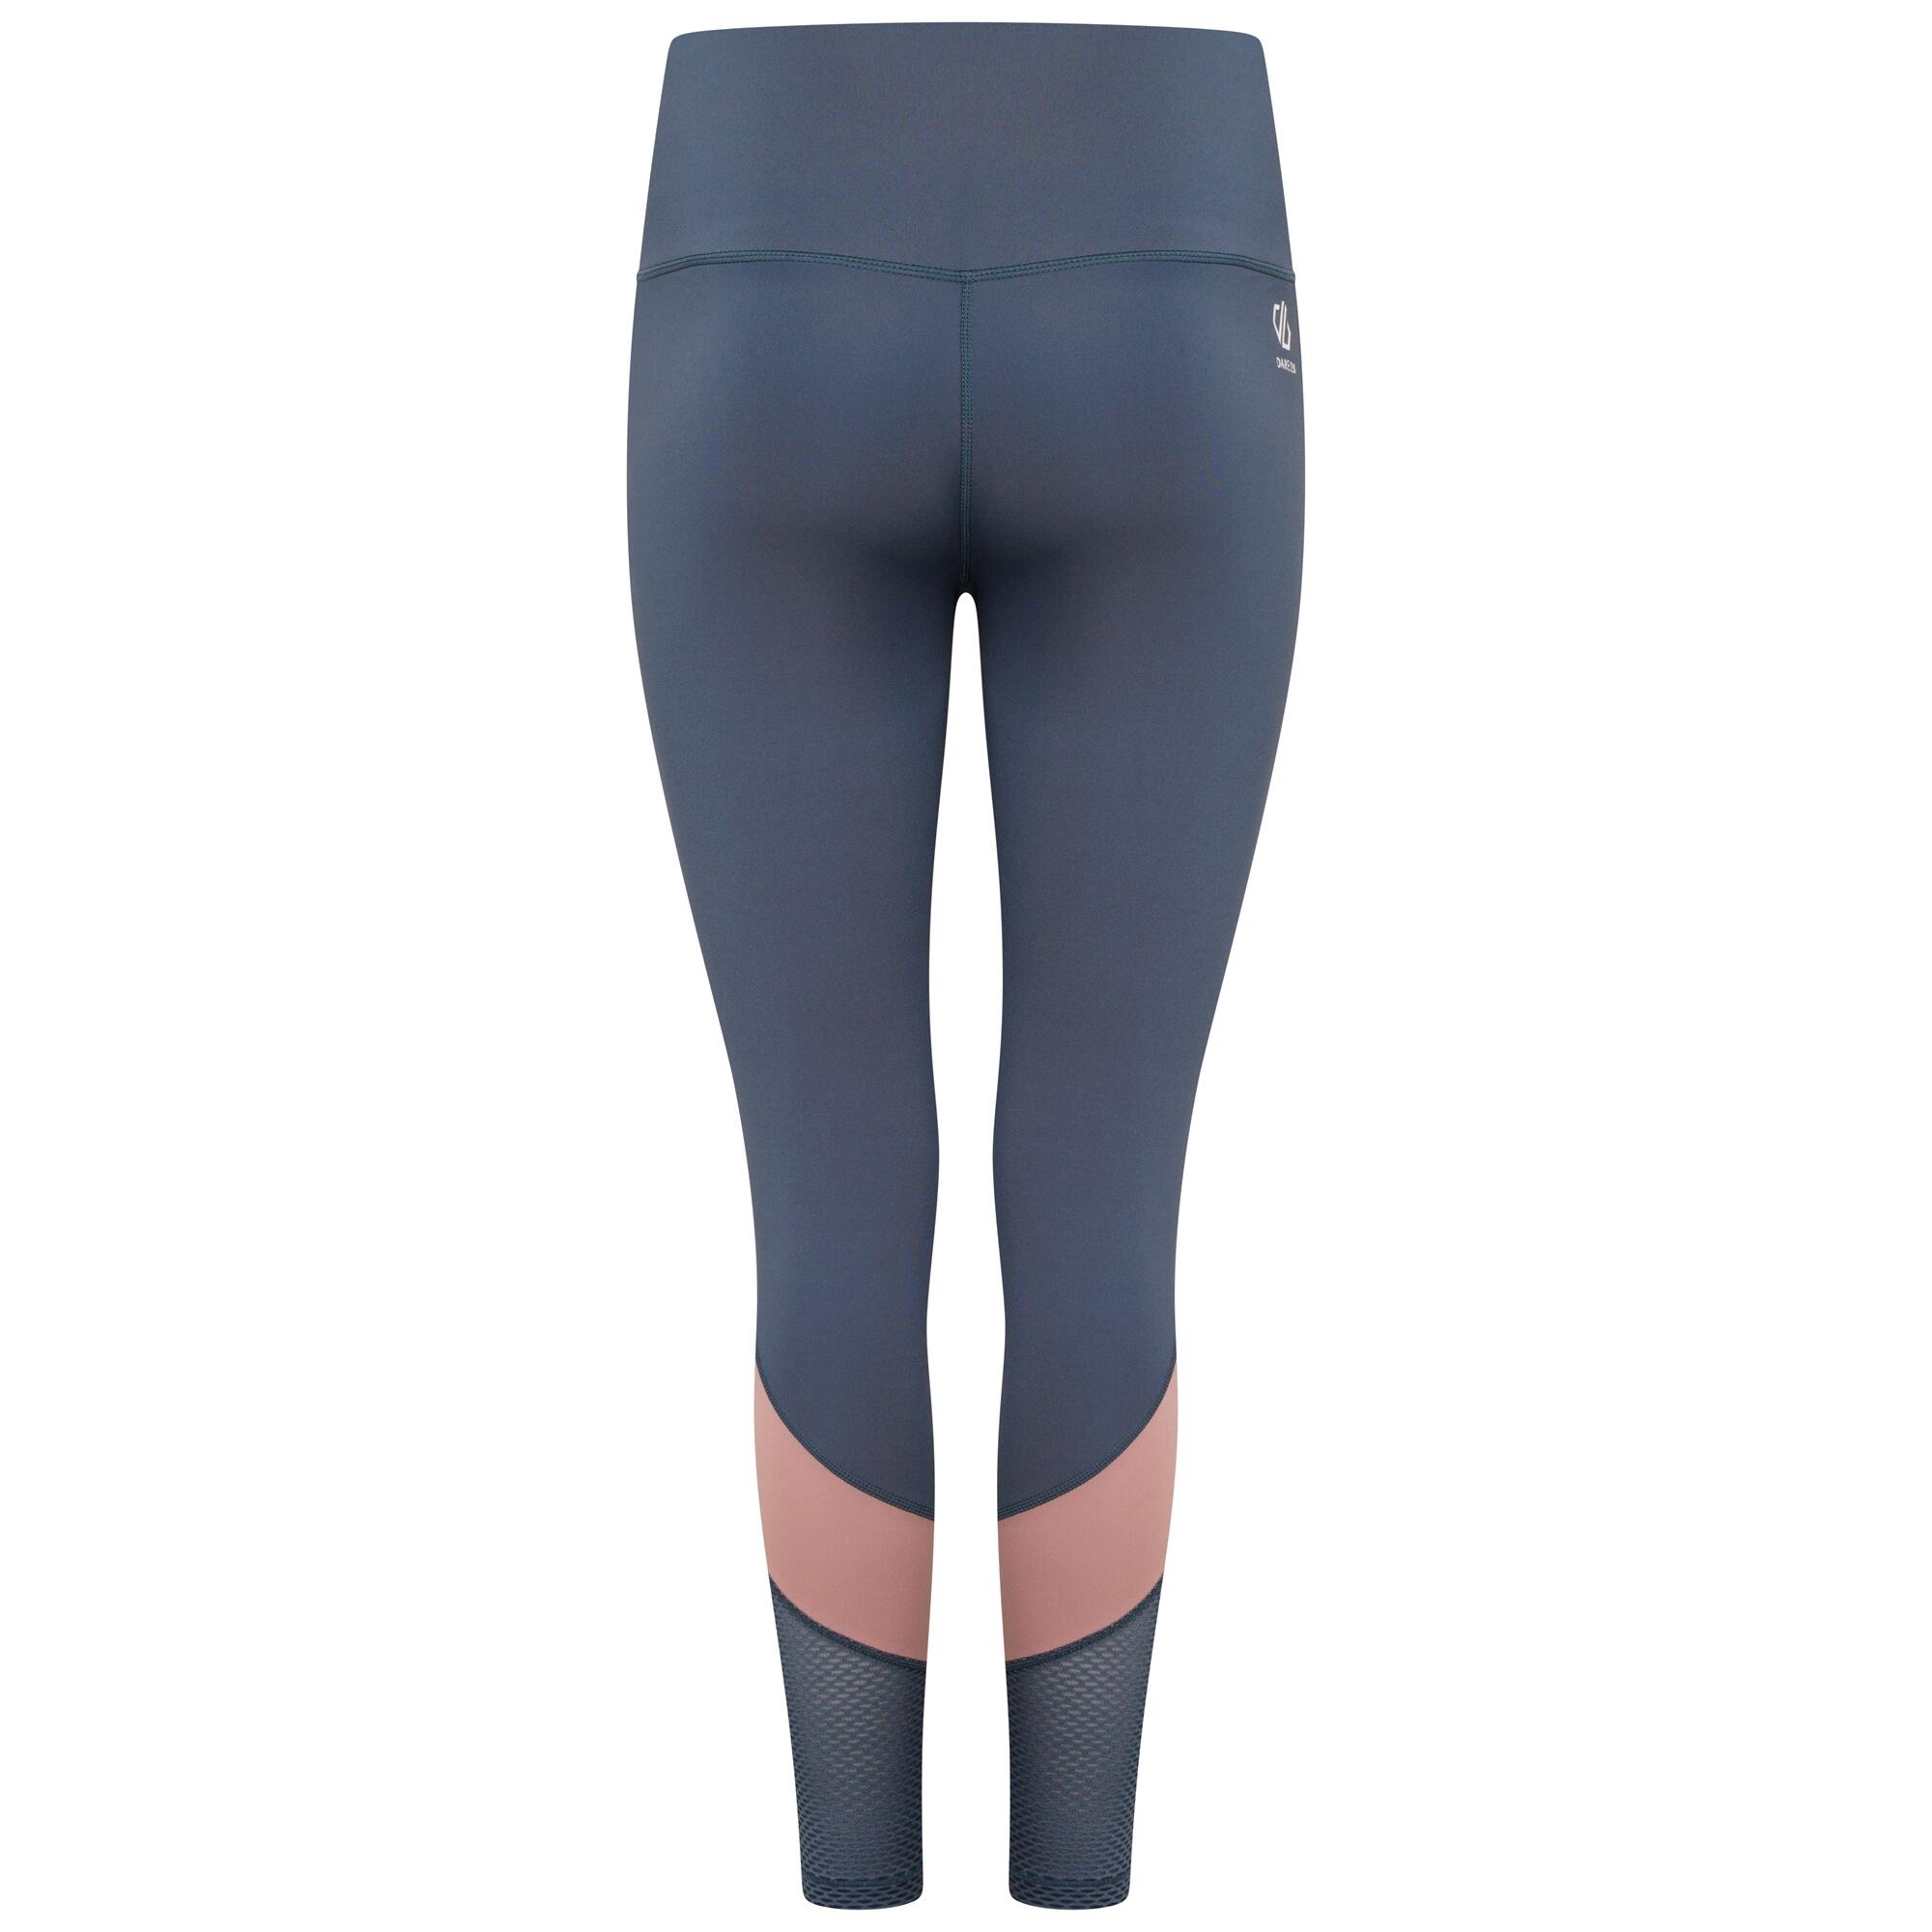 Womens/Ladies Move Fitness Leggings (Orion Grey/Dusty Rose) 2/4